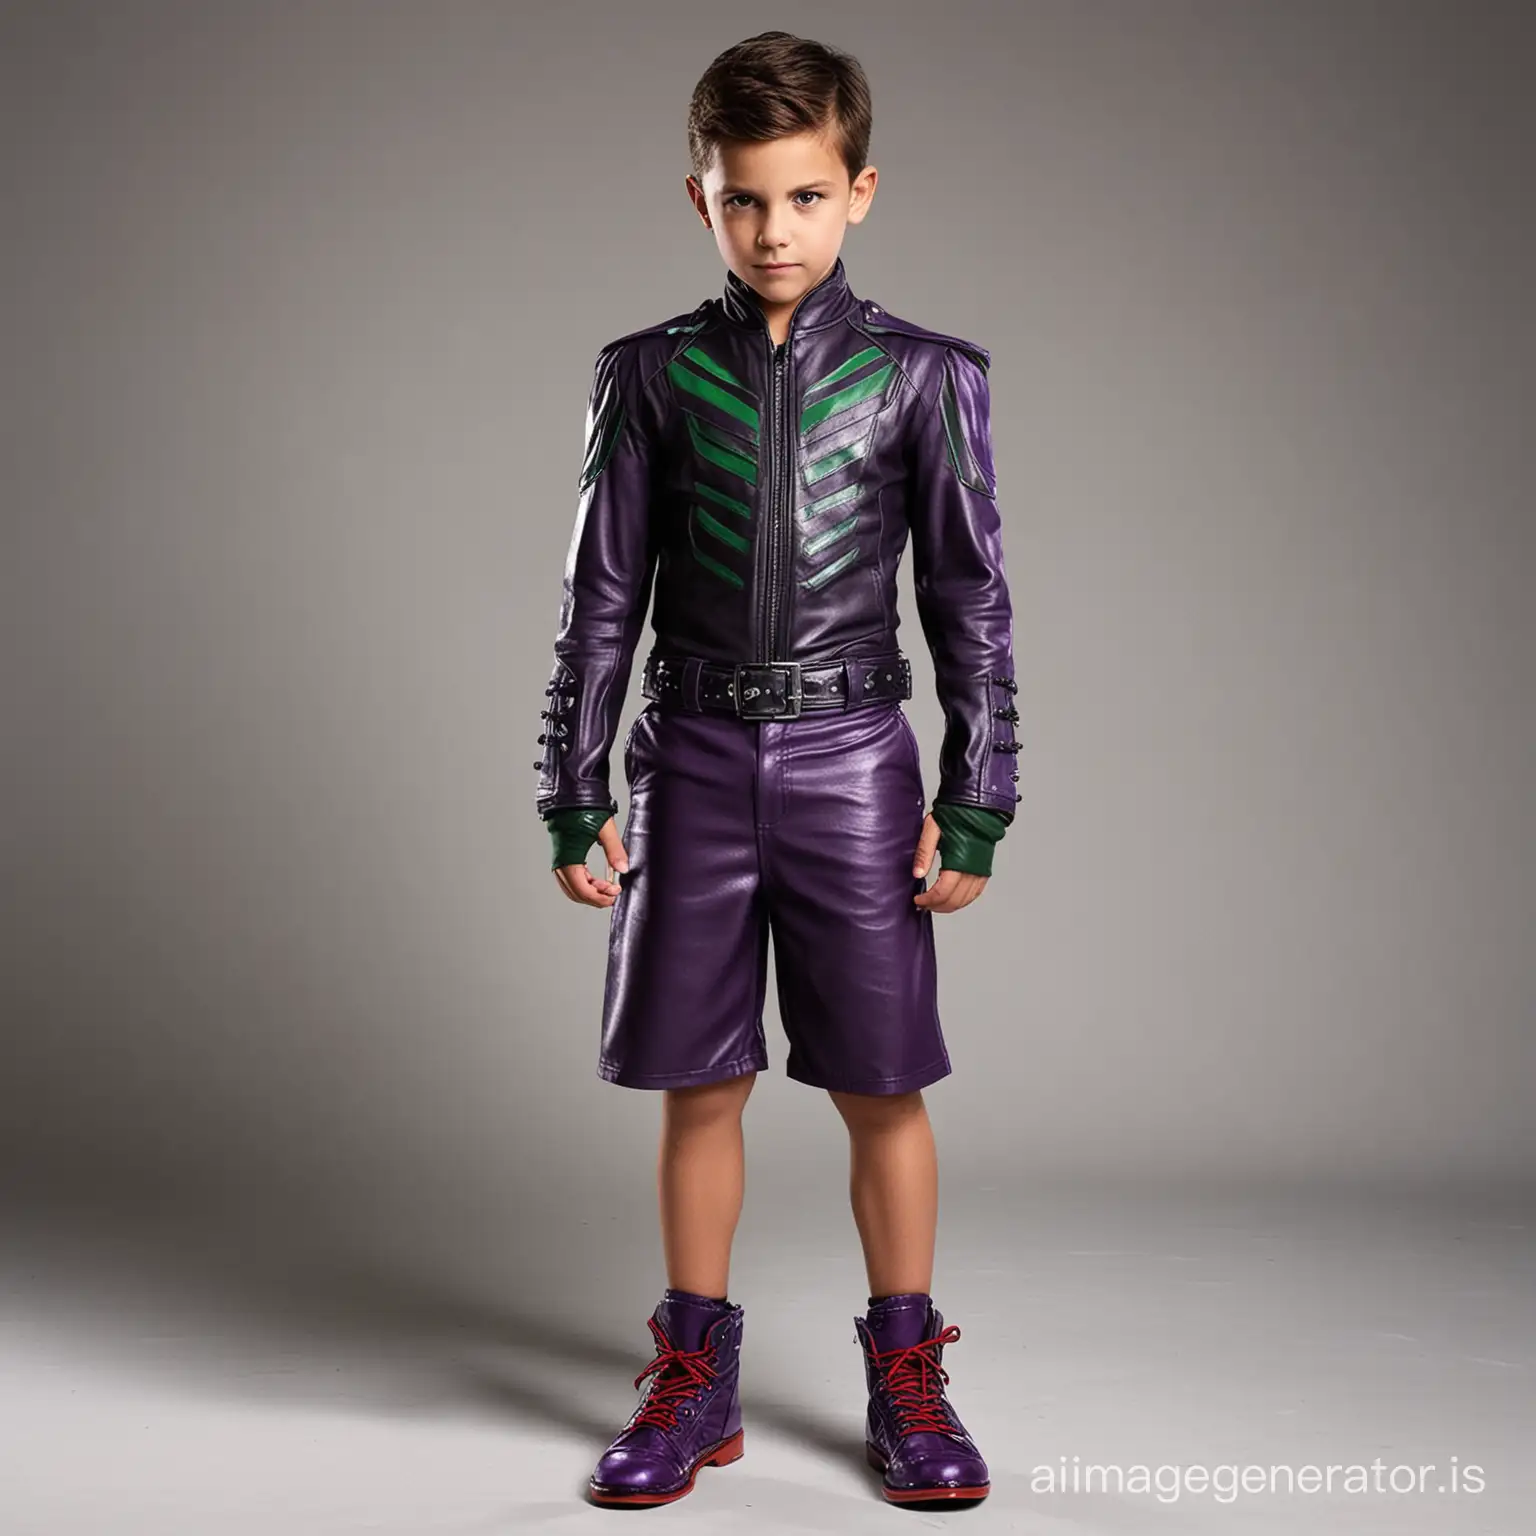 Create a villain outfit for a strong 8 year old boy villain with abs, cool, wicked, leather, shorts, comfortable yet intimidating, various shades of purple with hints of both green and red, both red and green should be included in every outfit but purple should be the main color, the shoes should also be coloured and match the outfit